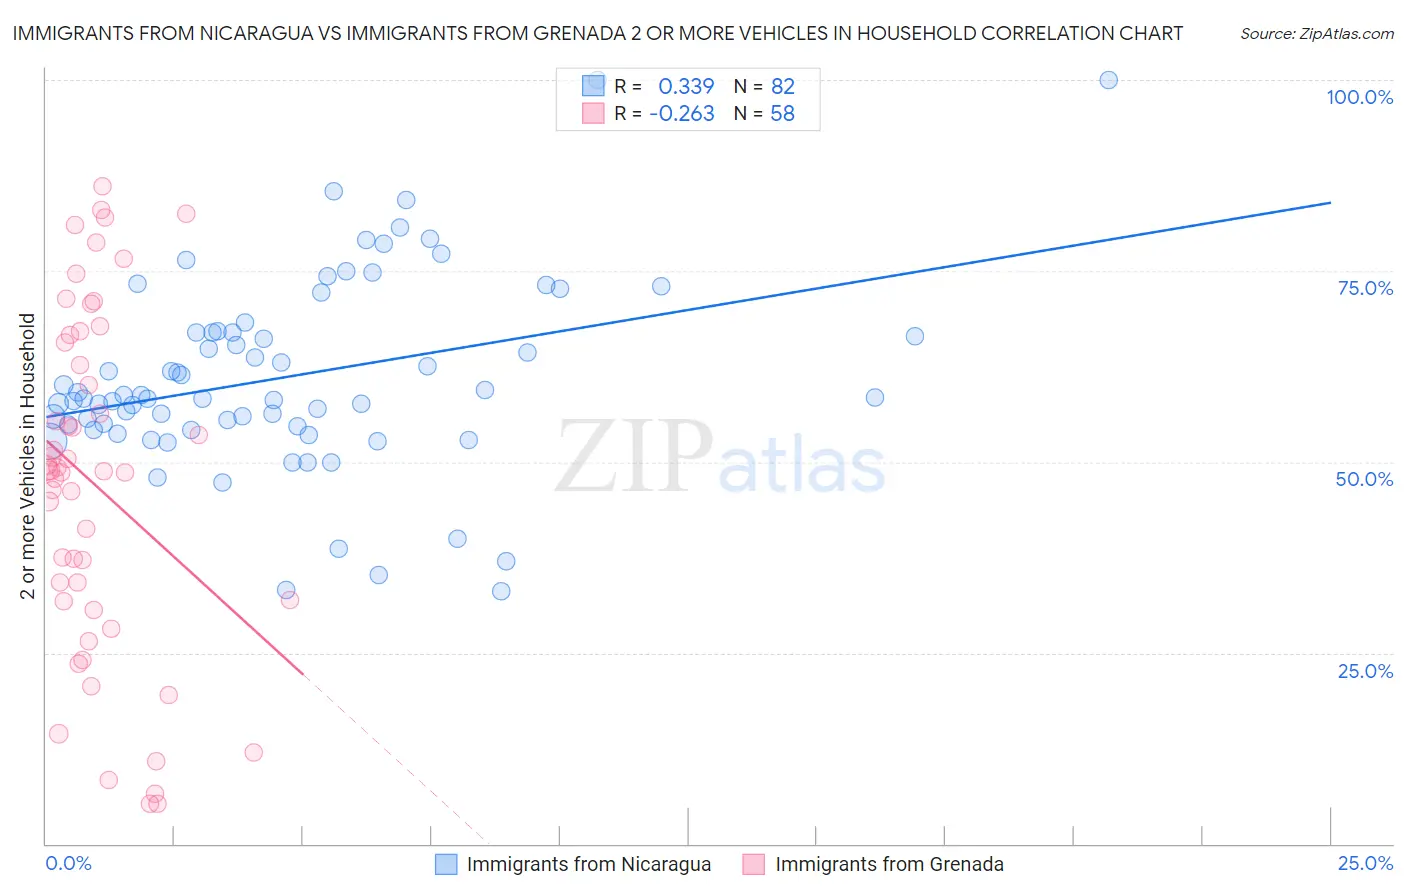 Immigrants from Nicaragua vs Immigrants from Grenada 2 or more Vehicles in Household